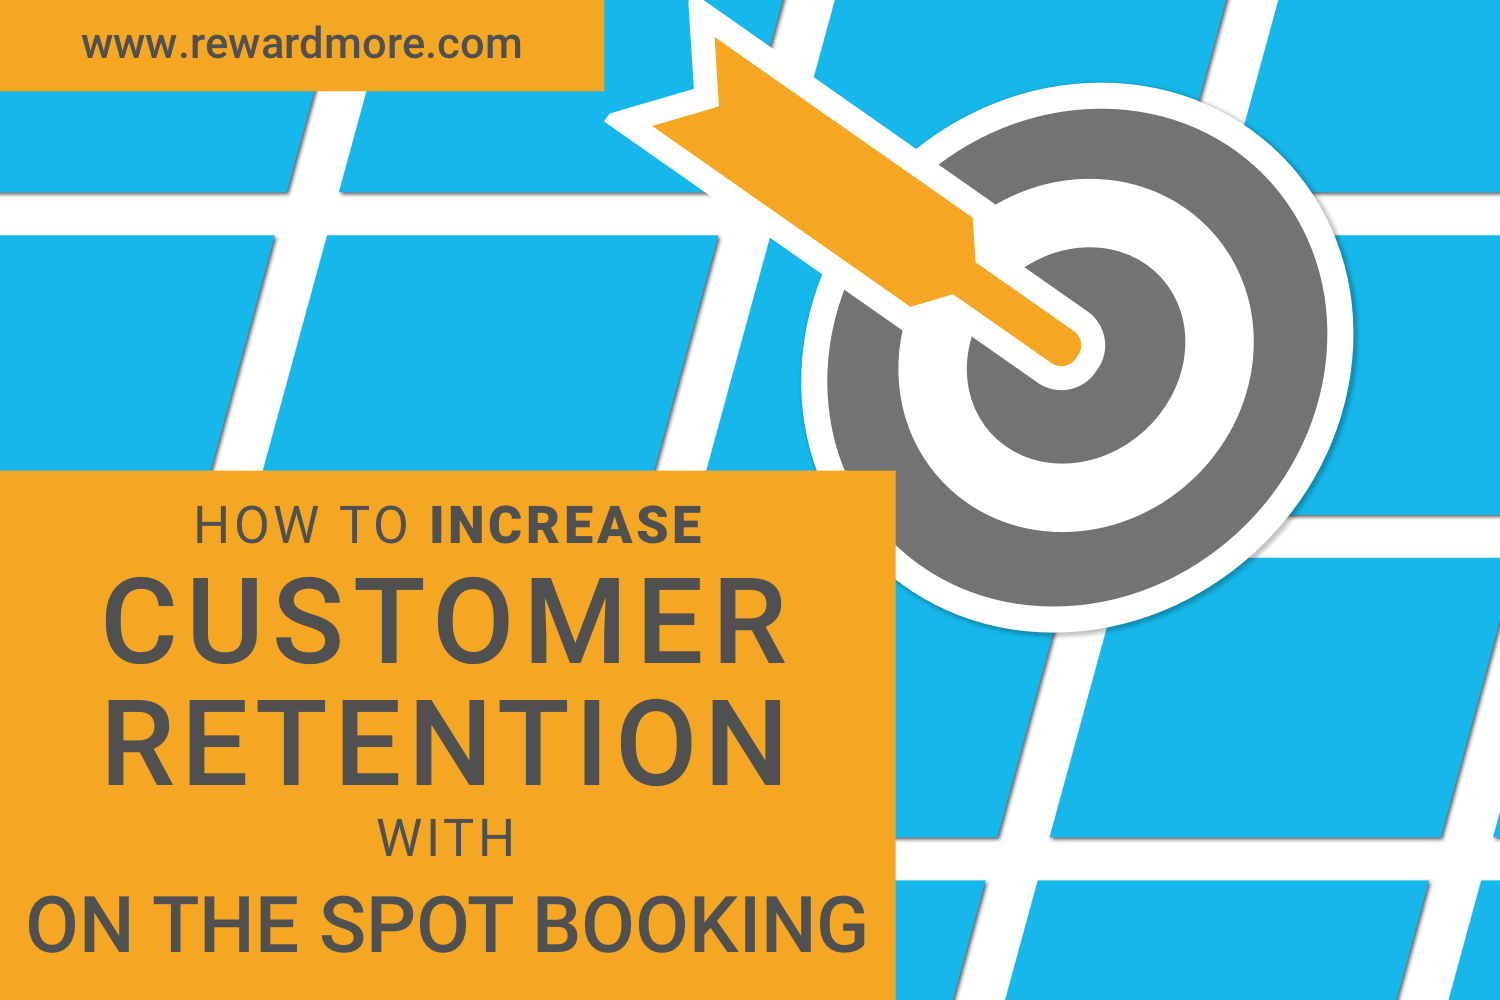 How to Increase Customer Retention with On-the-Spot Bookings